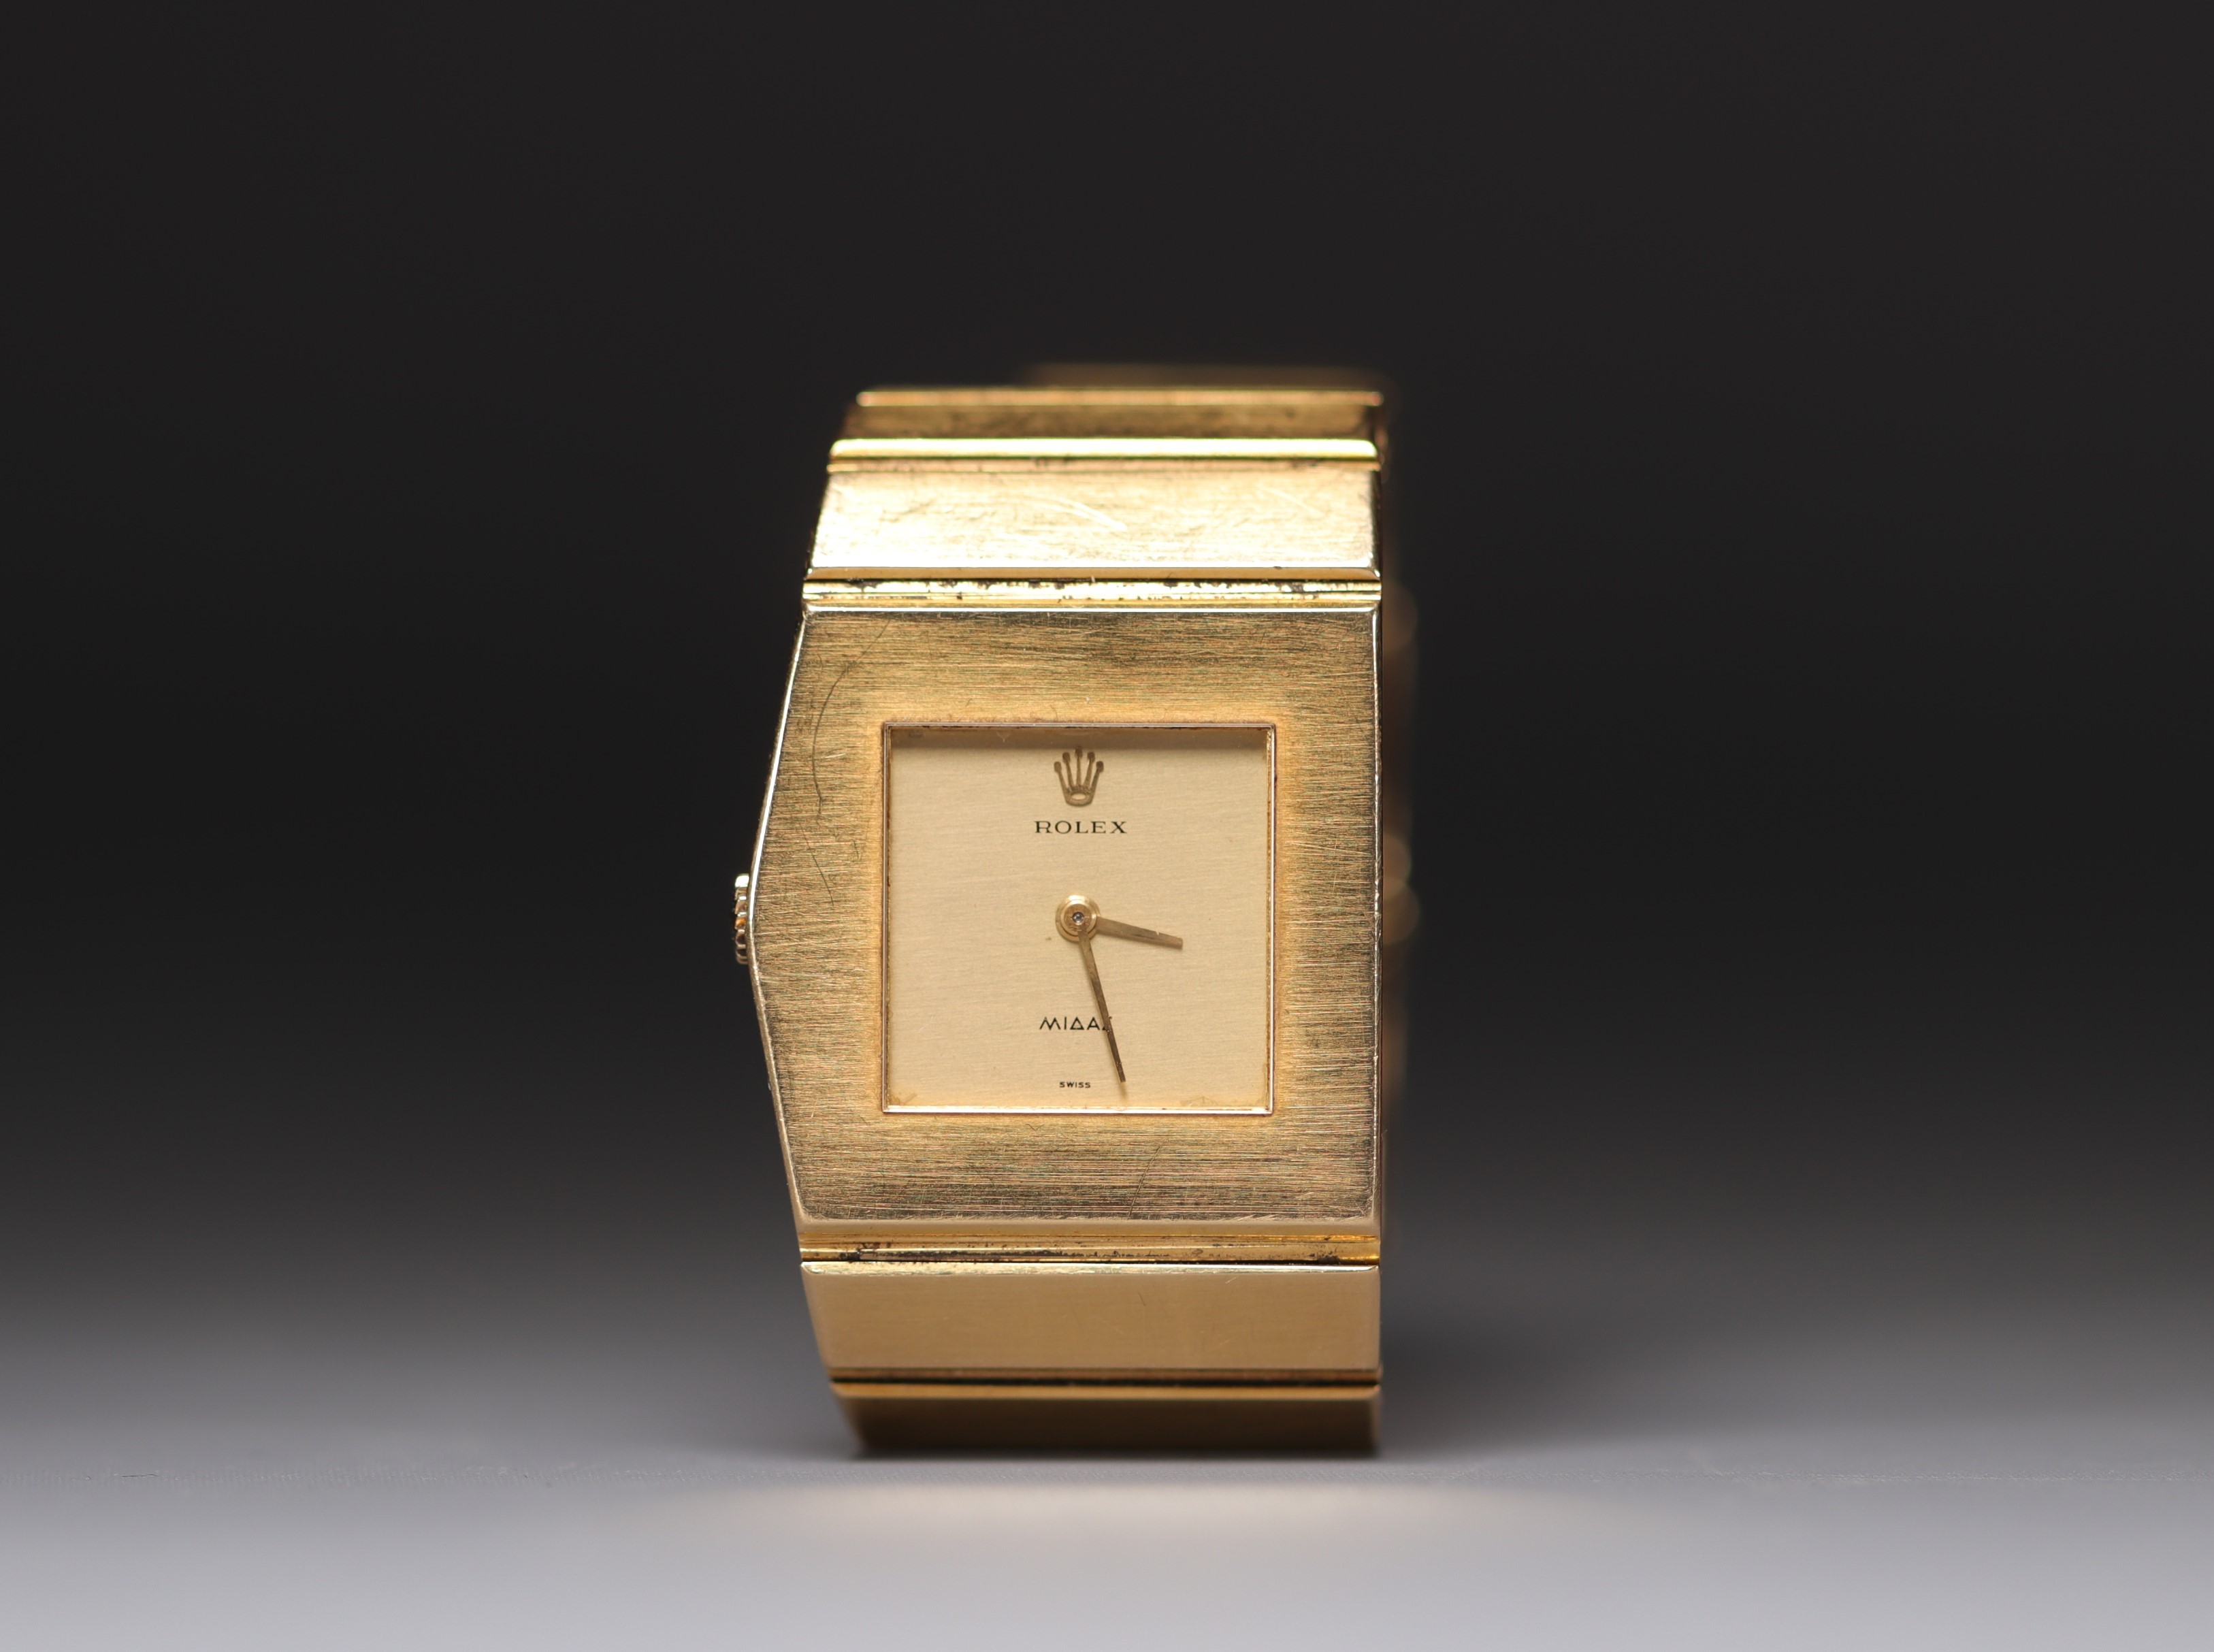 Rolex "King Midas" - Mechanical watch, case and bracelet in 18K yellow gold, ref 9630, calibre 650.  - Image 2 of 7